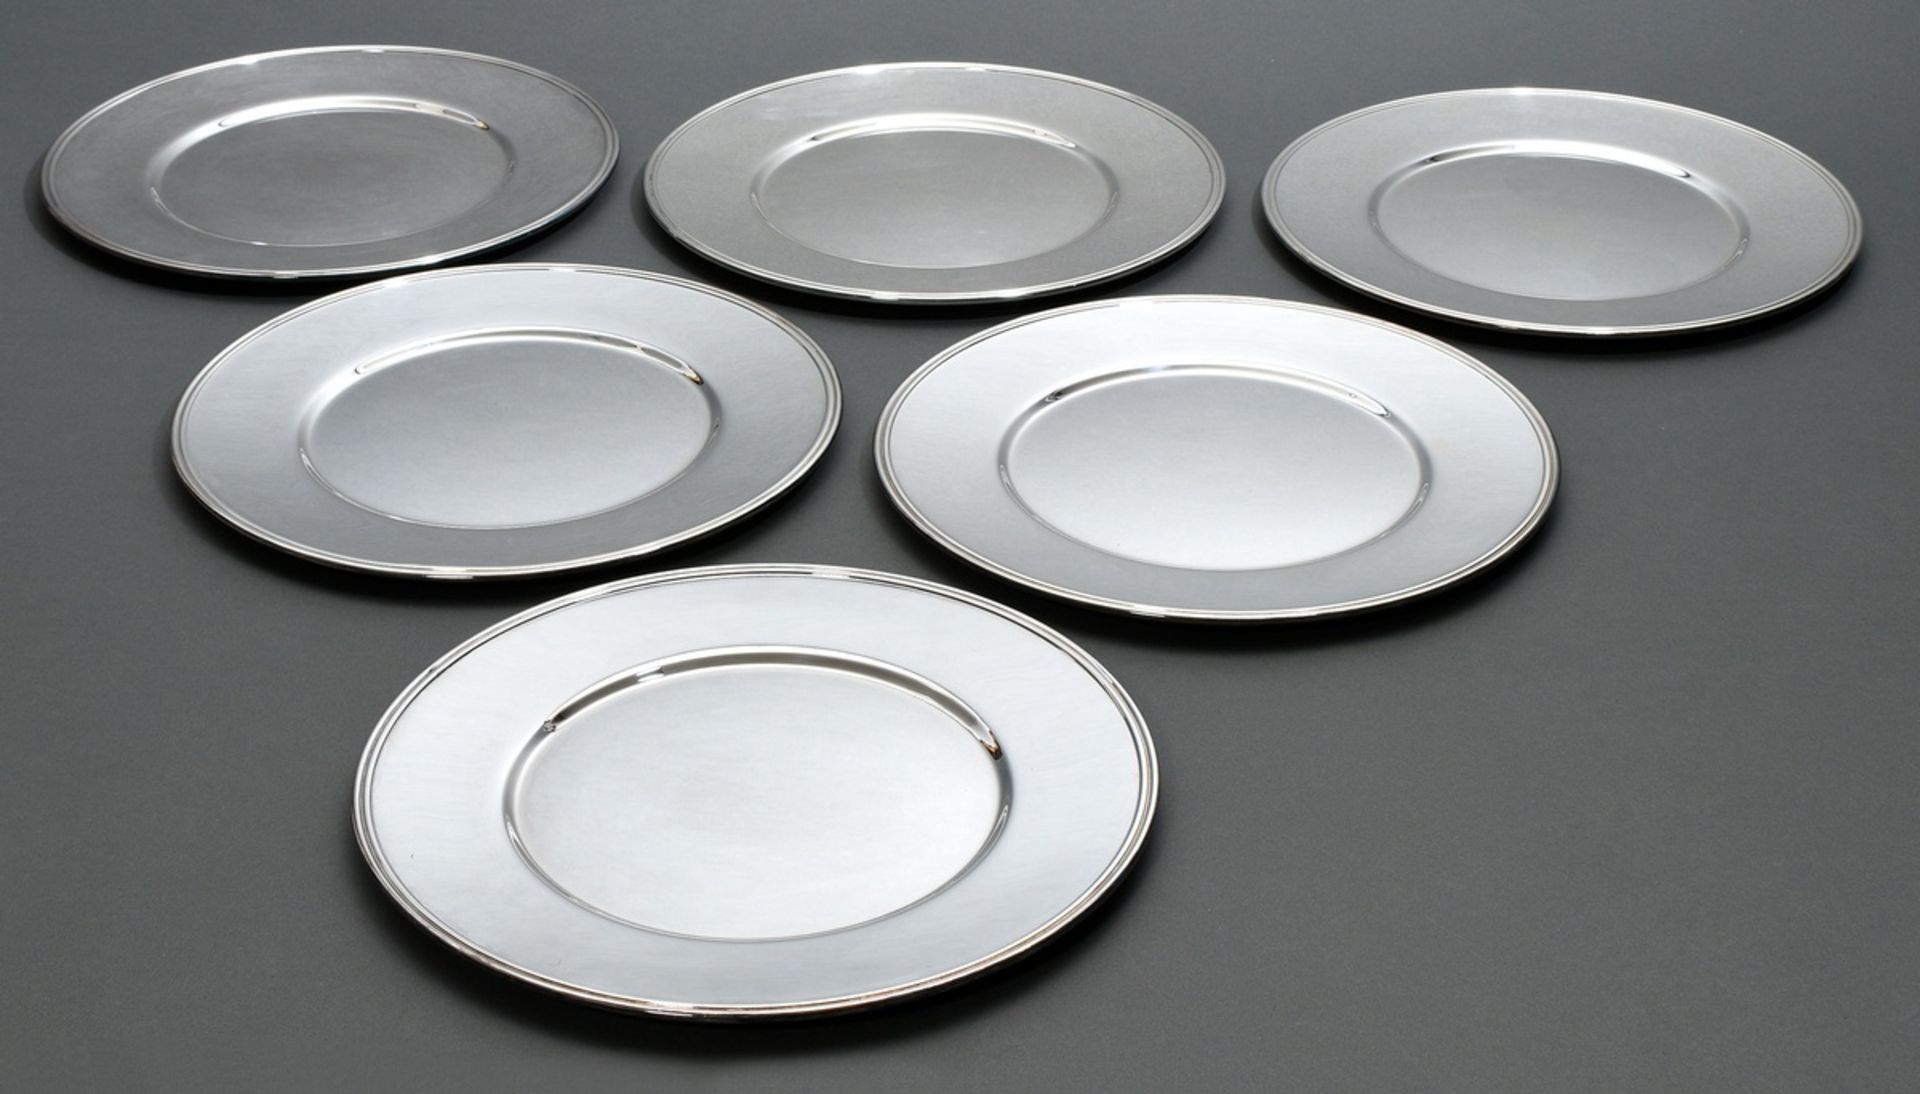 6 Modern place plates in a simple design, Wilkens, silver 925, 6240g, Ø 32cm, in original sleeves - Image 2 of 7